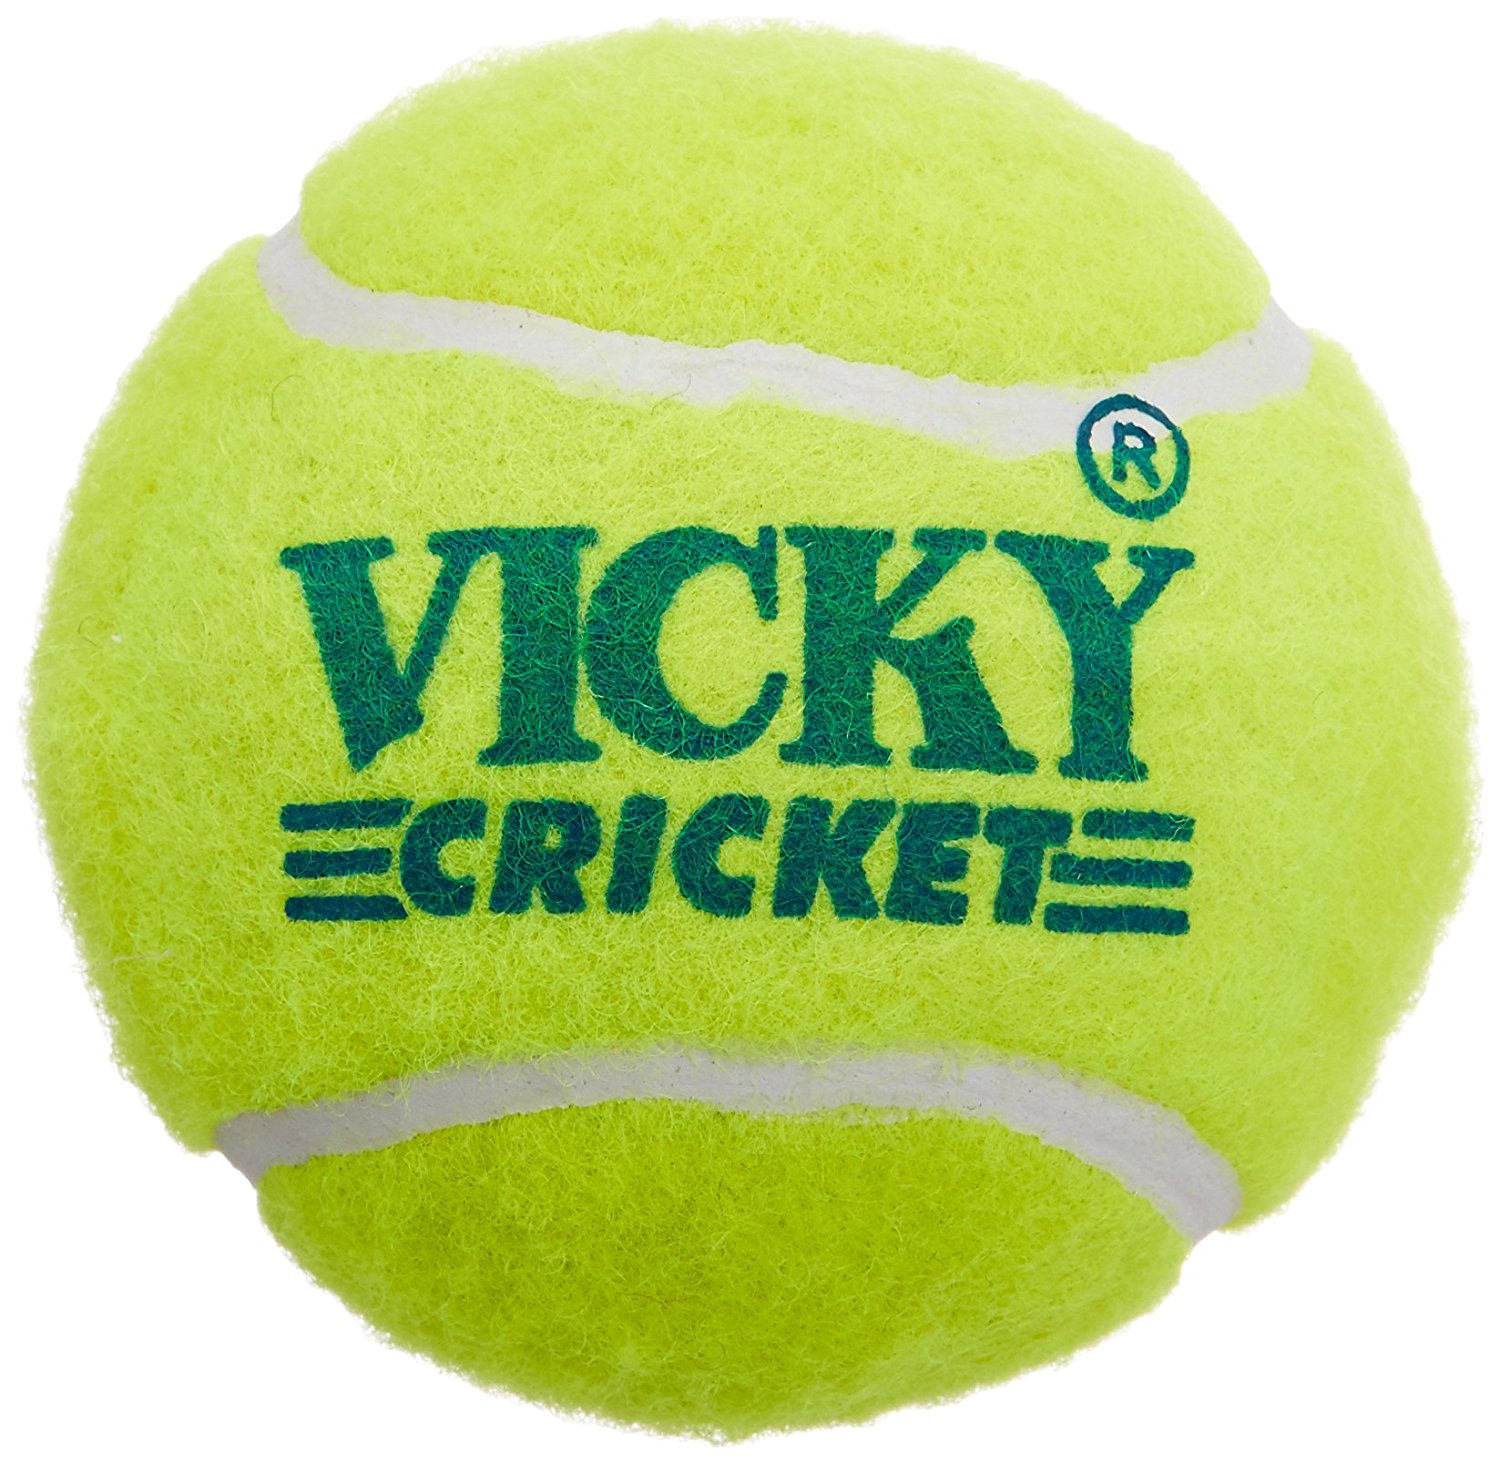 Vicky Tennis Cricket Ball, Pack of 6 (Yellow): Amazon.in: Sports ...